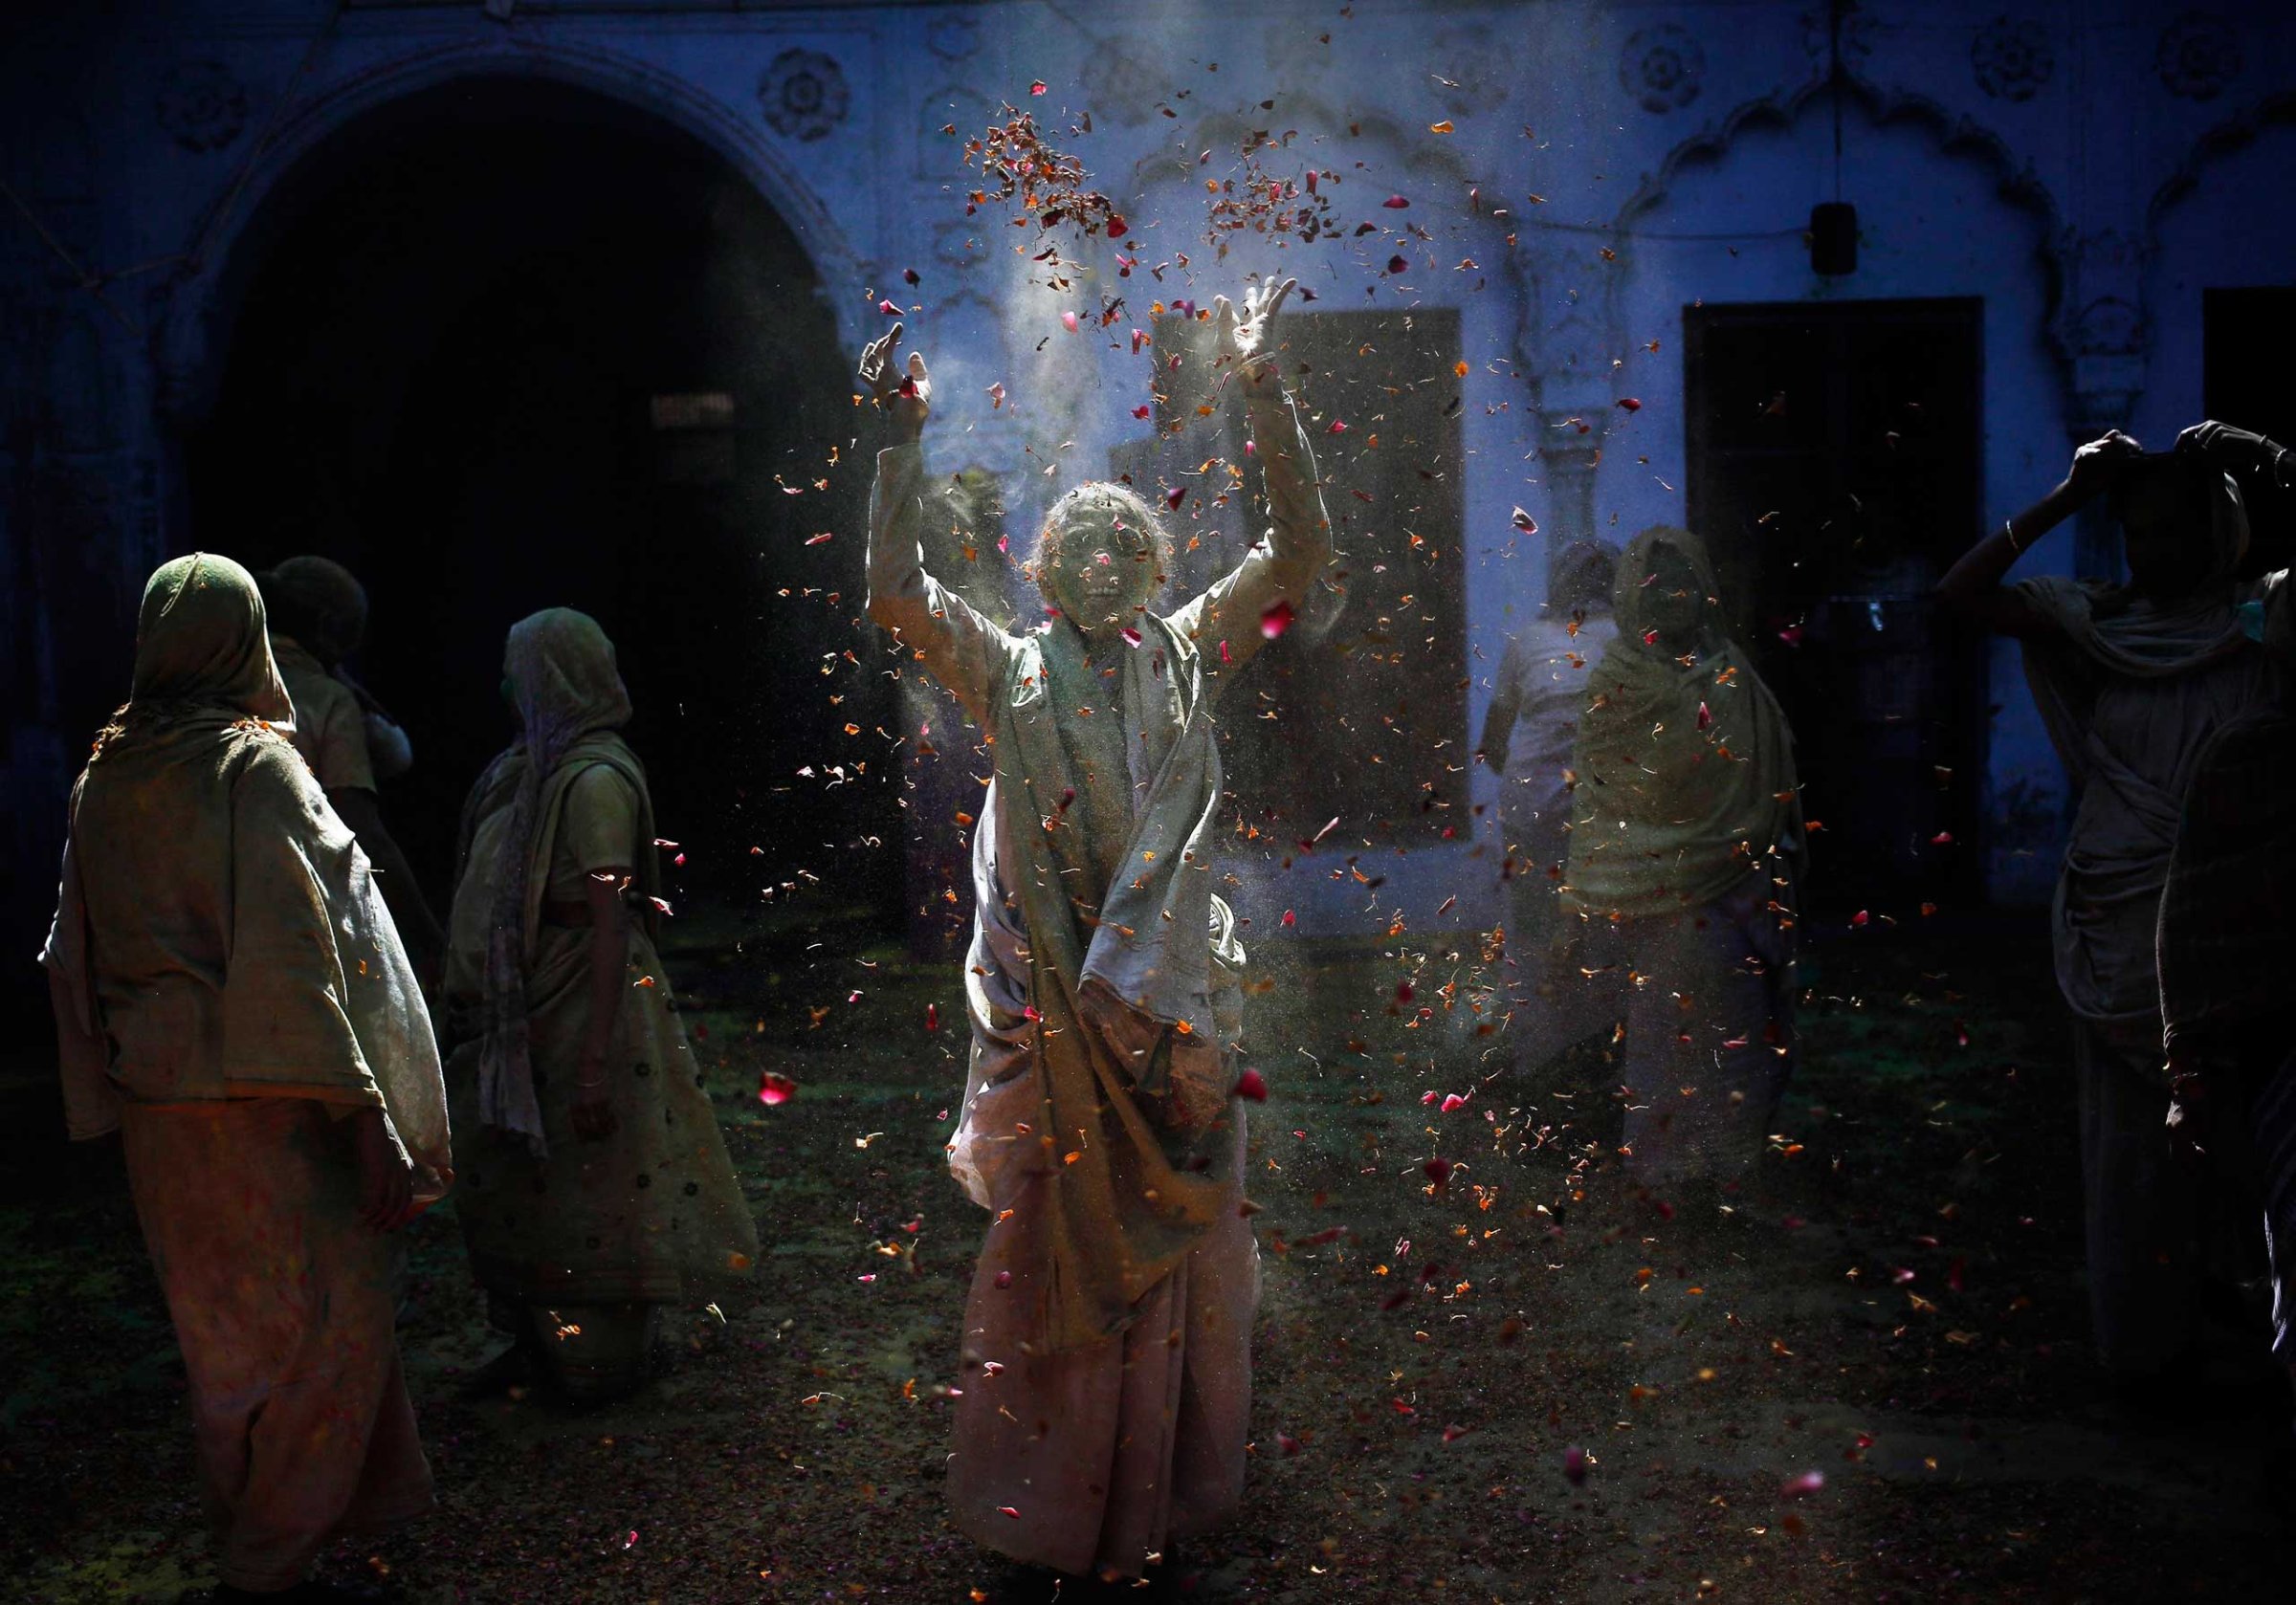 A widow throws flower petals as she, along with others, take part in the Holi celebrations organised by a non-governmental organisation Sulabh International at a widows' ashram at Vrindavan in the northern Indian state of Uttar Pradesh, March 4, 2015.